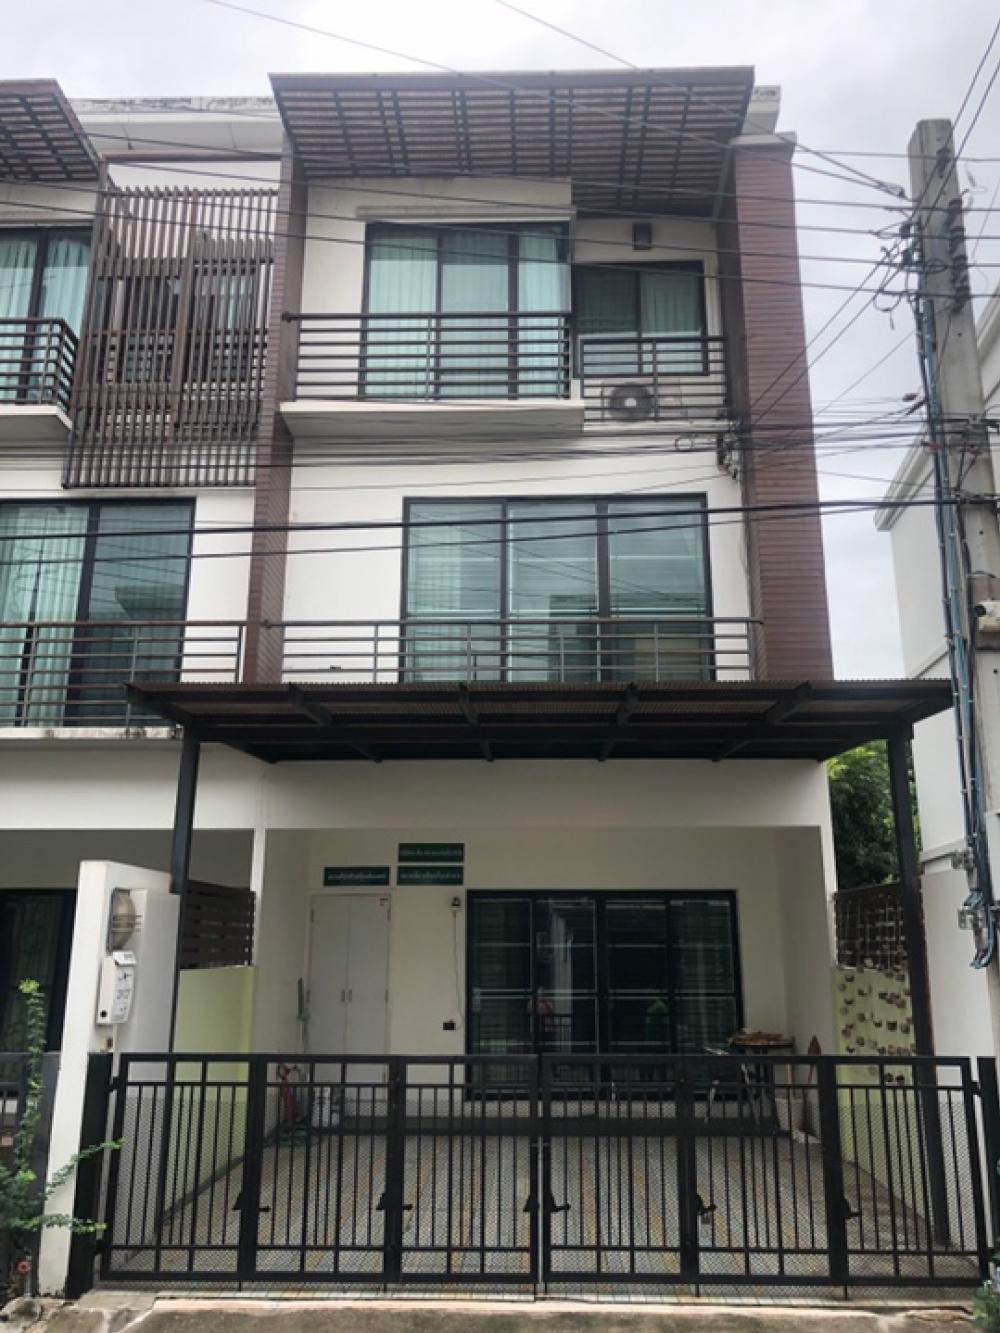 For SaleTownhouseNawamin, Ramindra : Townhome for sale, 3 levels, Preve Fidelio Ratchada Ram Intra project, corner unit, built-in throughout the house, 24 hour security#Townhome#Second hand townhome#Ratchada Ram Intra#Townhome for sale cheap